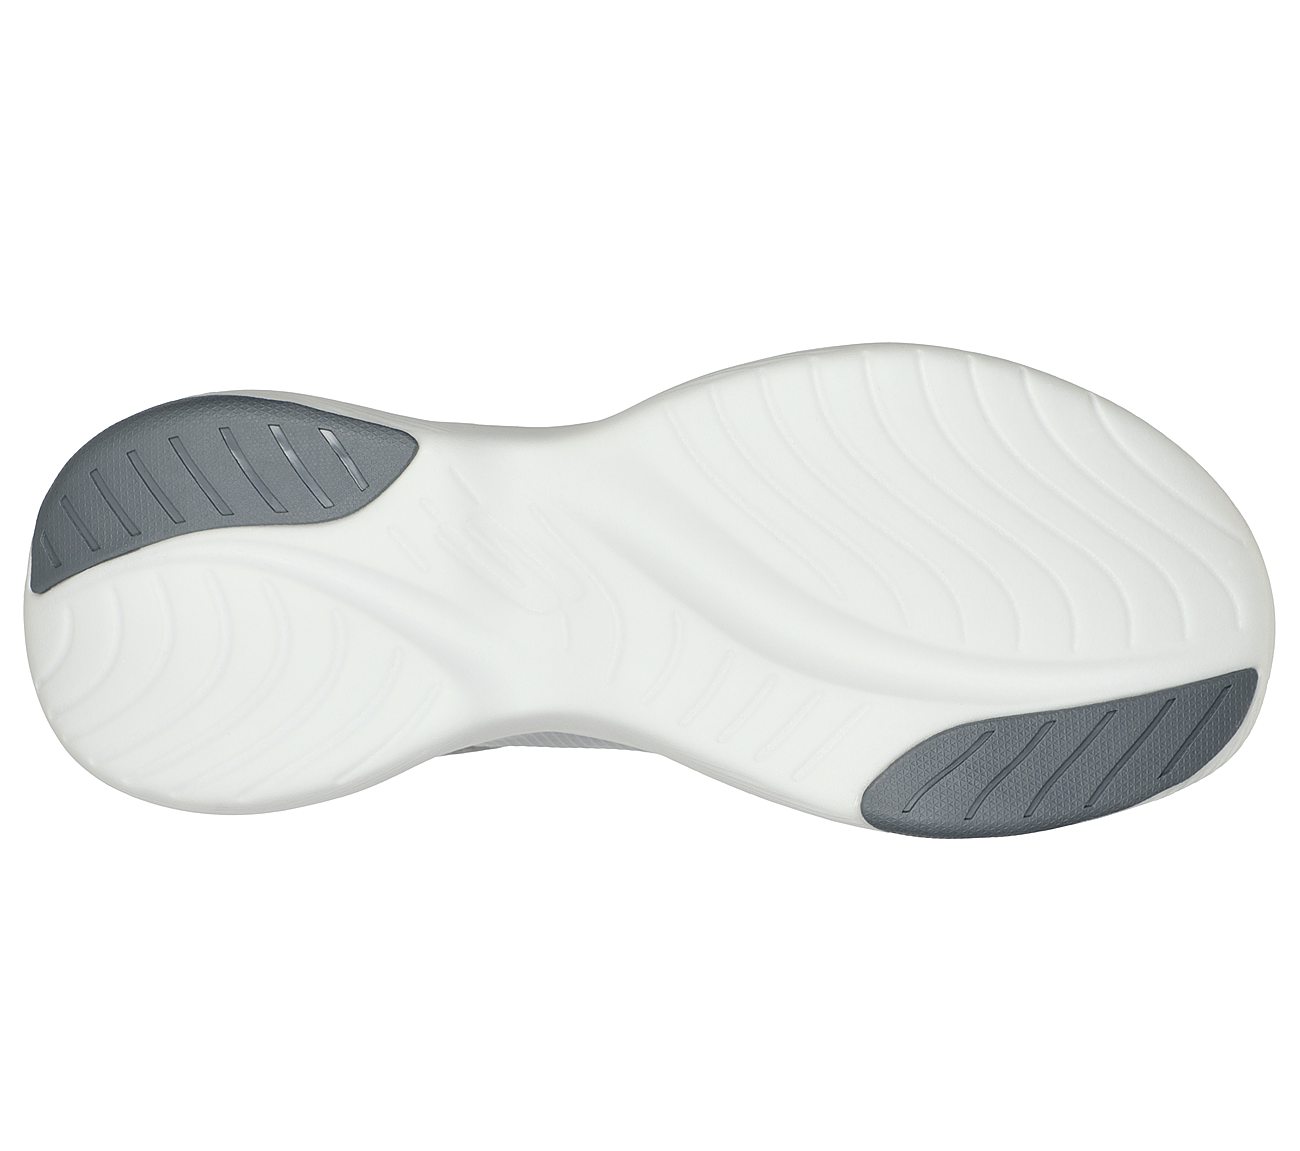 ARCH FIT INFINITY, WHITE/GREY Footwear Bottom View